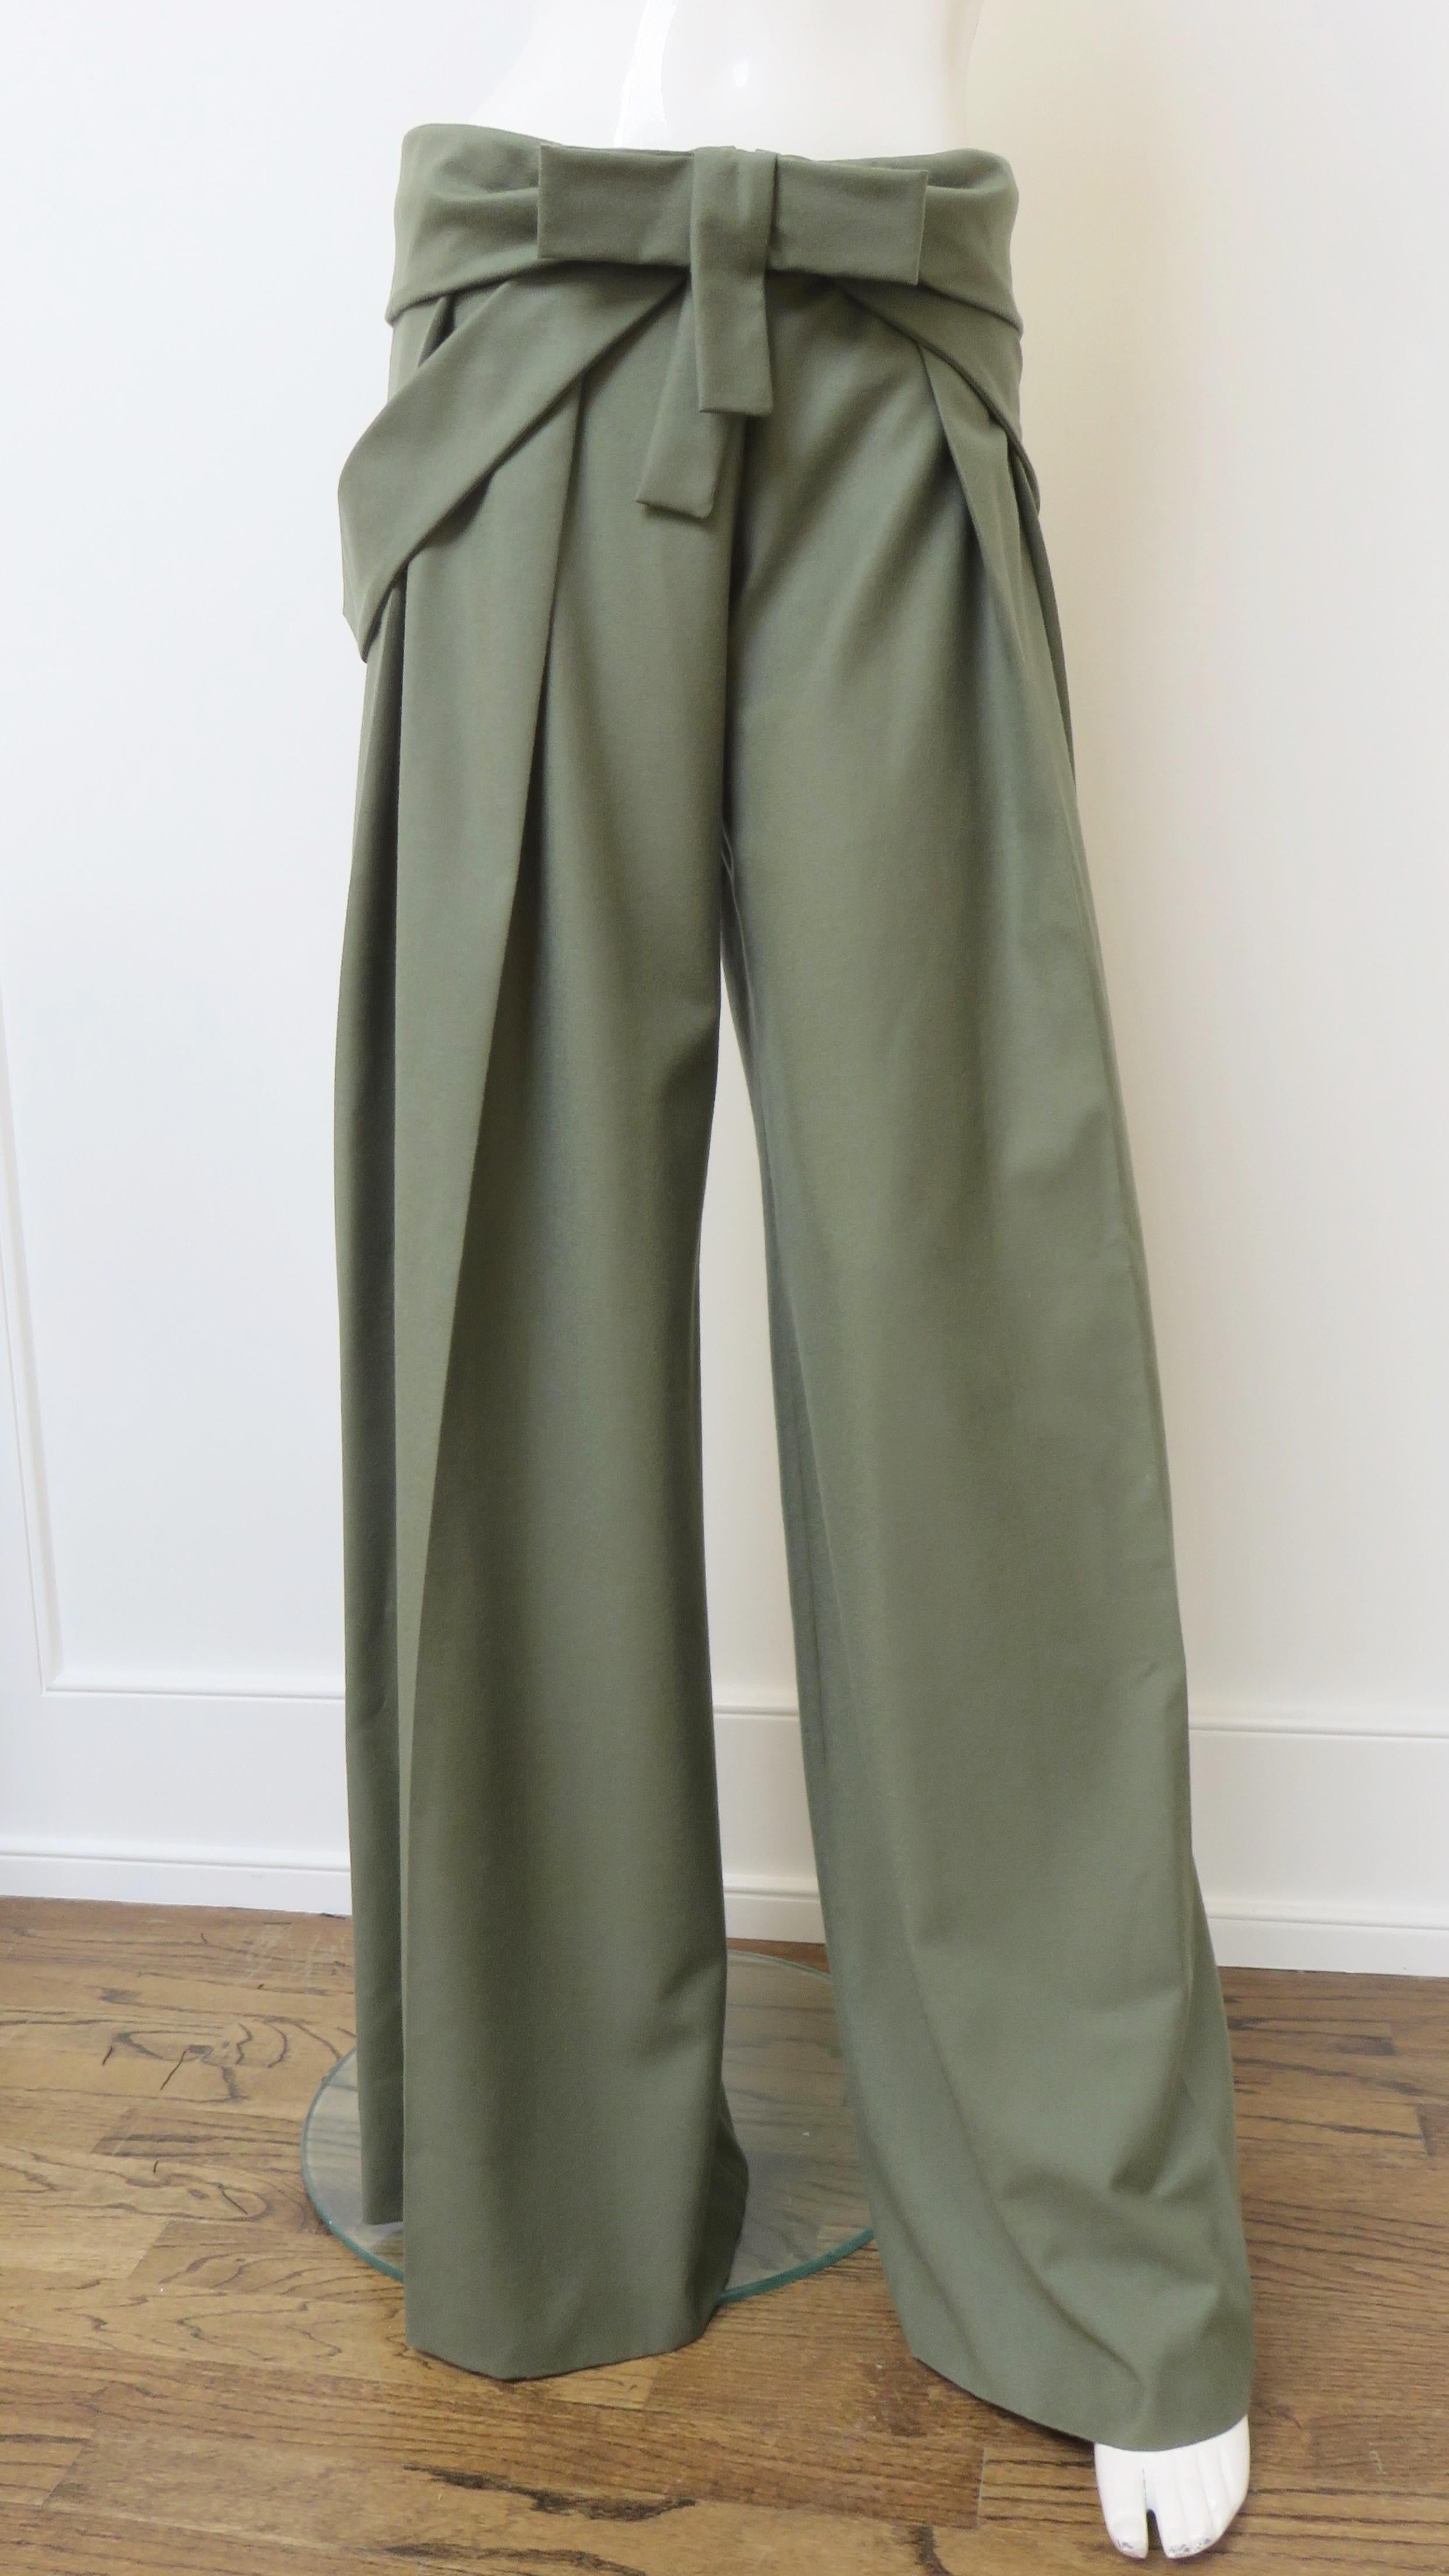 Beautiful green cashmere wide leg pants by Alexander Mcqueen.  They are mid rise and have a ruched waistband with a front bow, front zipper and bands which loop through bound openings on each side and drape along the sides of the legs. The pants